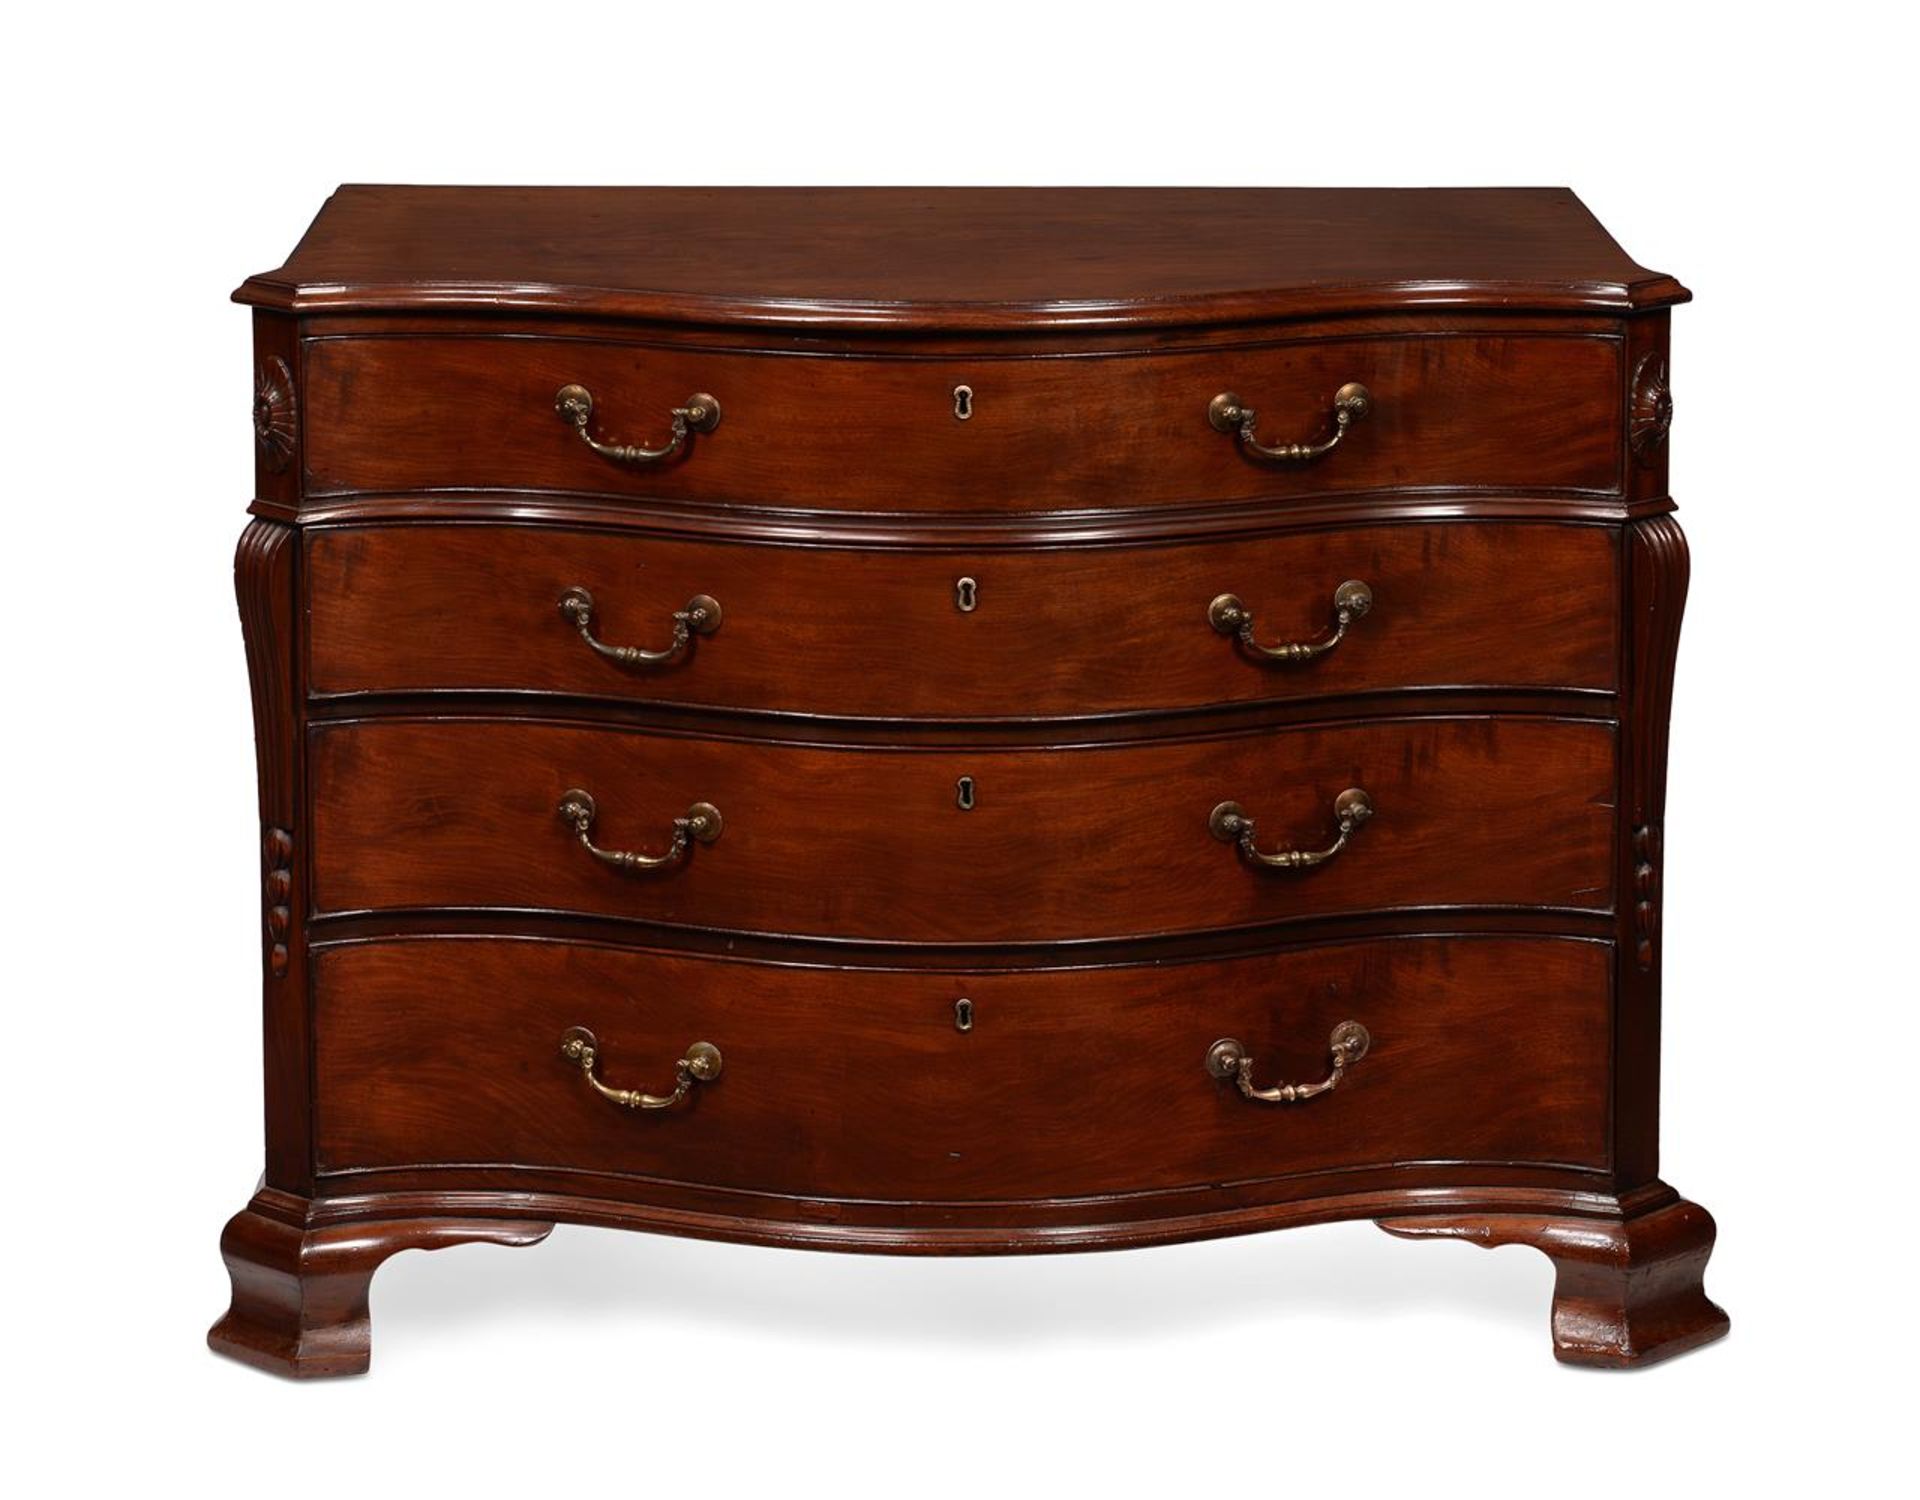 A GEORGE III MAHOGANY SERPENTINE COMMODE, IN THE MANNER OF THOMAS CHIPPENDALE, CIRCA 1770 - Image 4 of 9